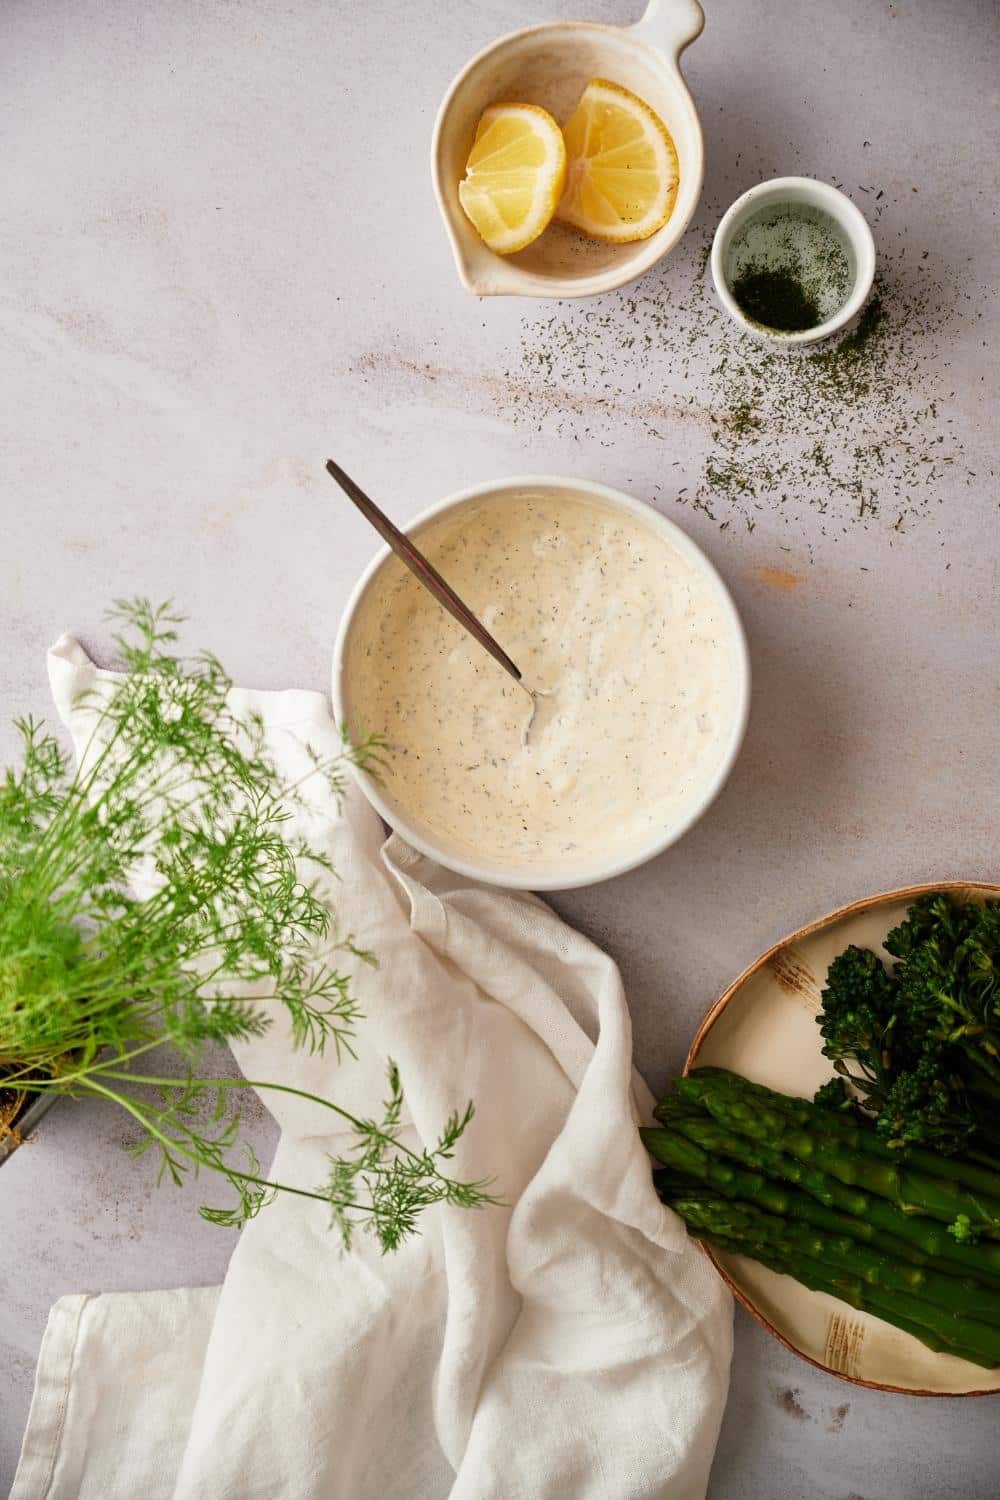 A medium sized bowl of dill sauce with a metal spoon resting in the center. Surrounding the bowl are small bowls of lemon wedges and chopped dill, a plate of asparagus with broccolini, a tea towel, and fresh dill fronds.